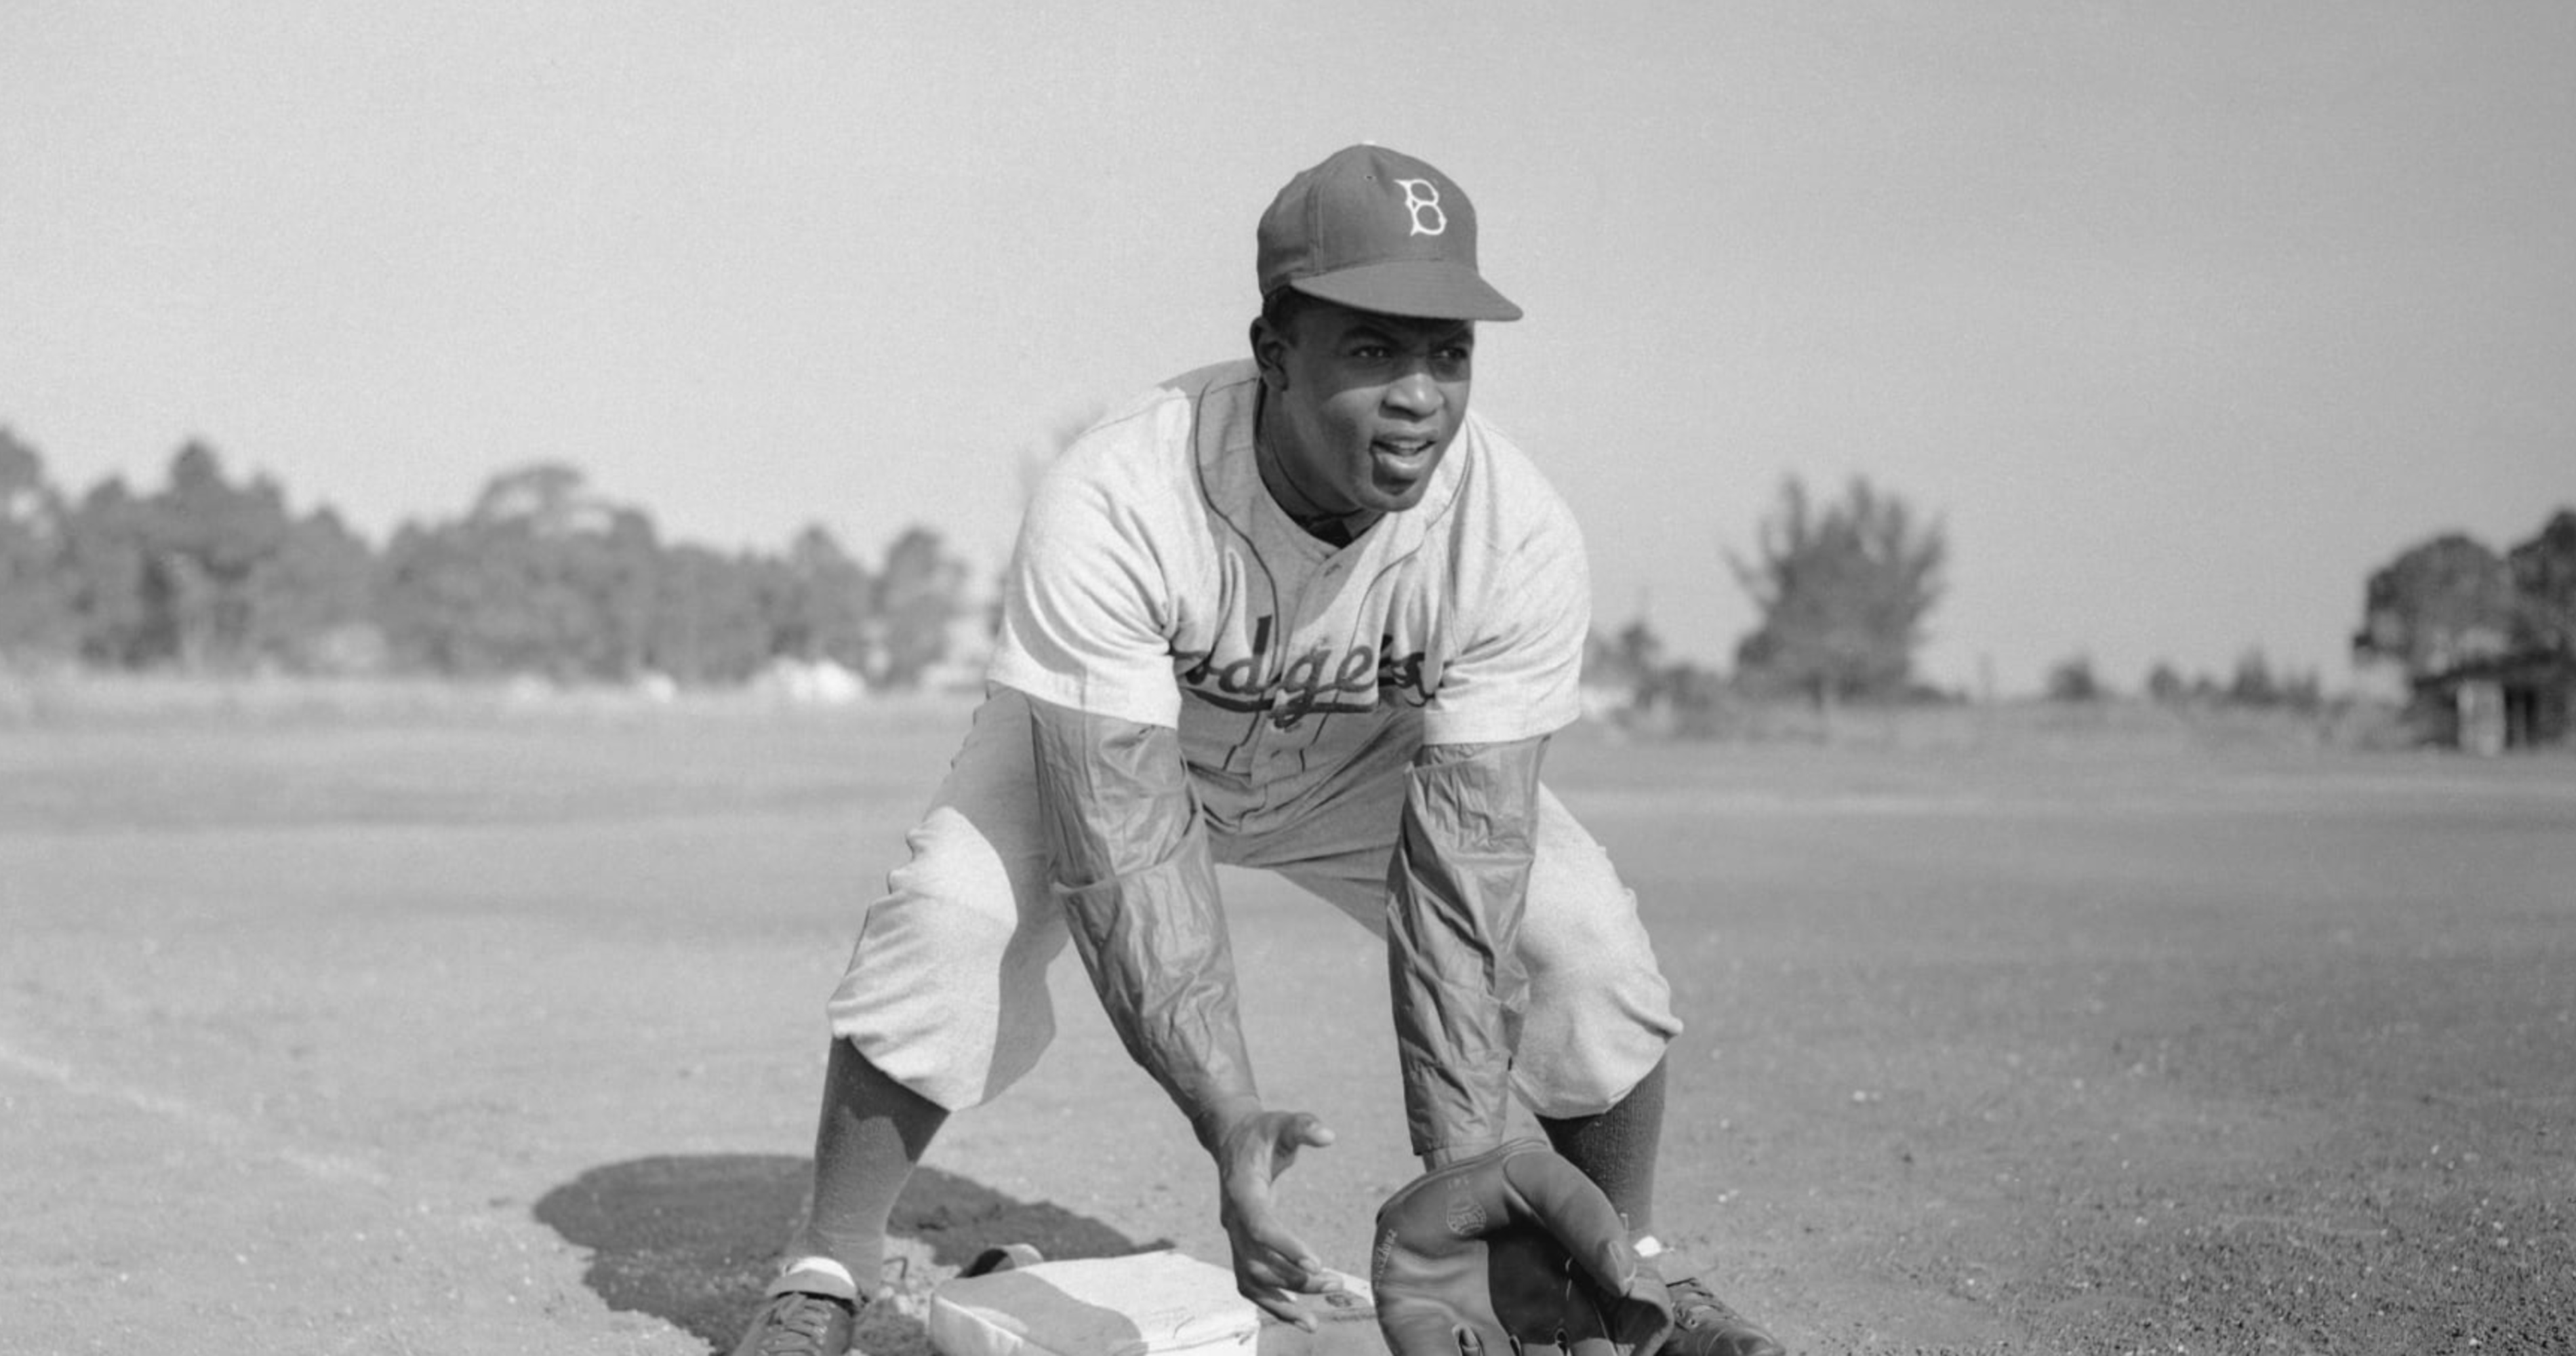 MLB announces year-long celebration to honor Jackie Robinson